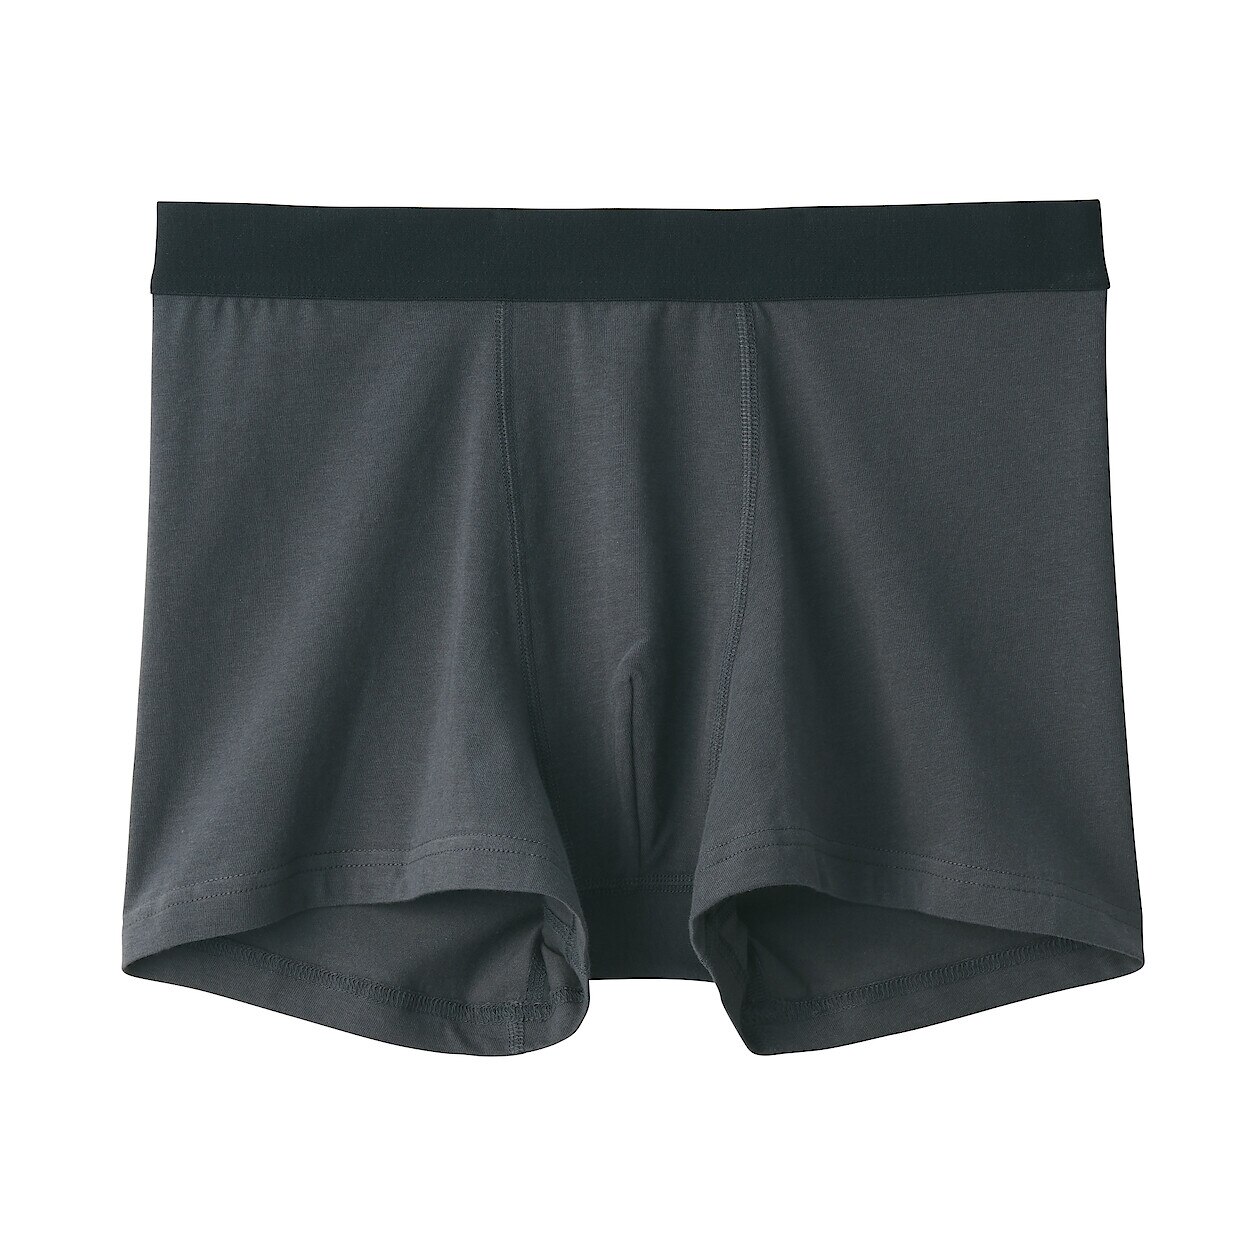 Men's Jersey Stretch Boxer Shorts